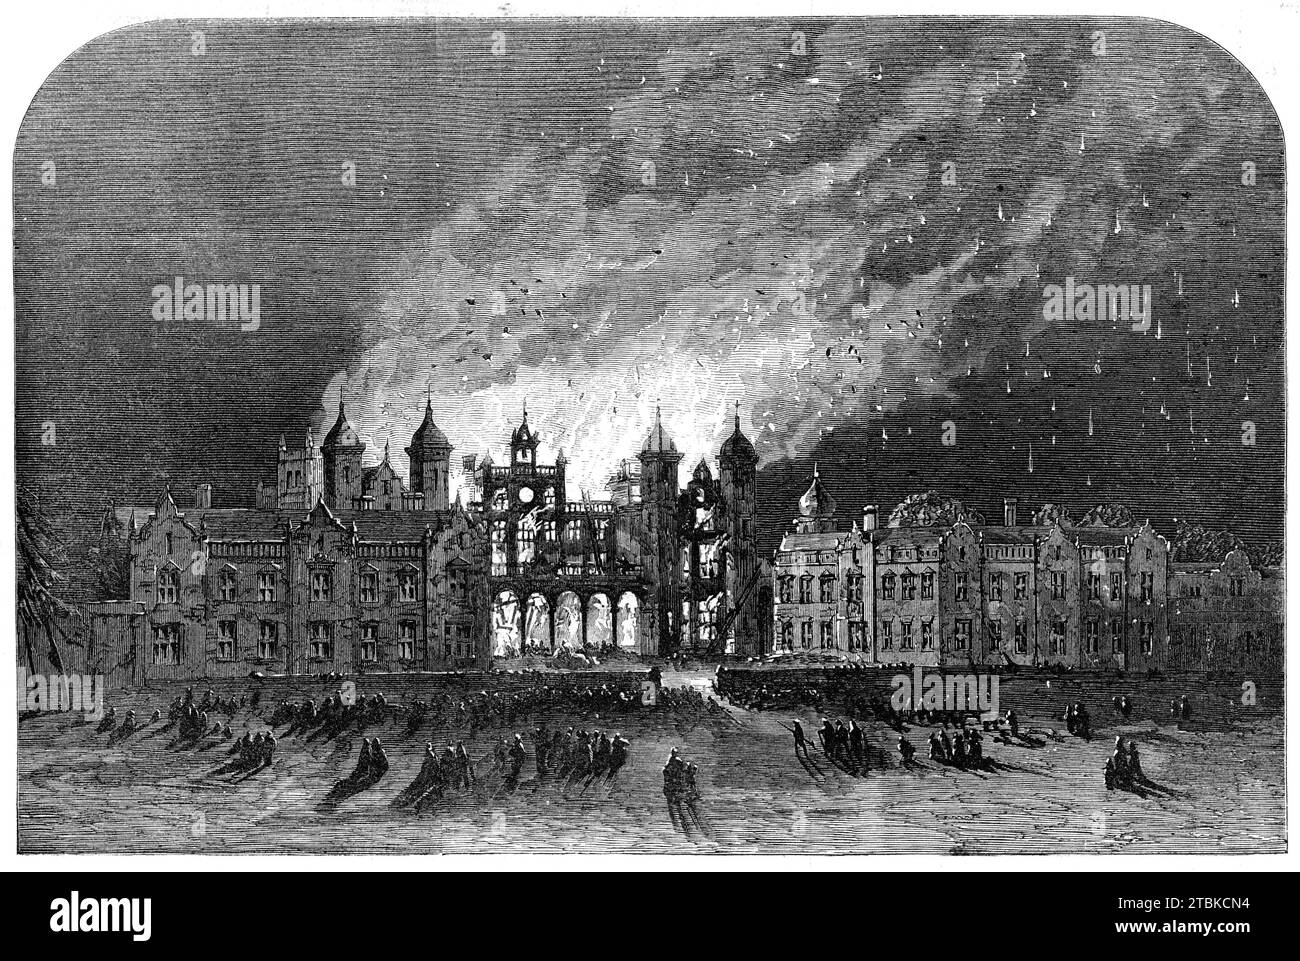 The Burning of Capesthorne Hall, Cheshire: the South Front, 1861. 'The stately mansion...was...the scene of a terrible fire, which completely gutted the spacious and handsome building, and resulted in damage amounting to several thousand pounds...the only inmates of the hall when the catastrophe occurred were the owner Arthur Henry Davenport, Esq. and a guest, and the usual servants. The fire...must have been in existence some time before discovered by the footman...[who] raised the alarm...but...within an hour or two the flames issued forth from almost every window in front of the mansion and Stock Photo